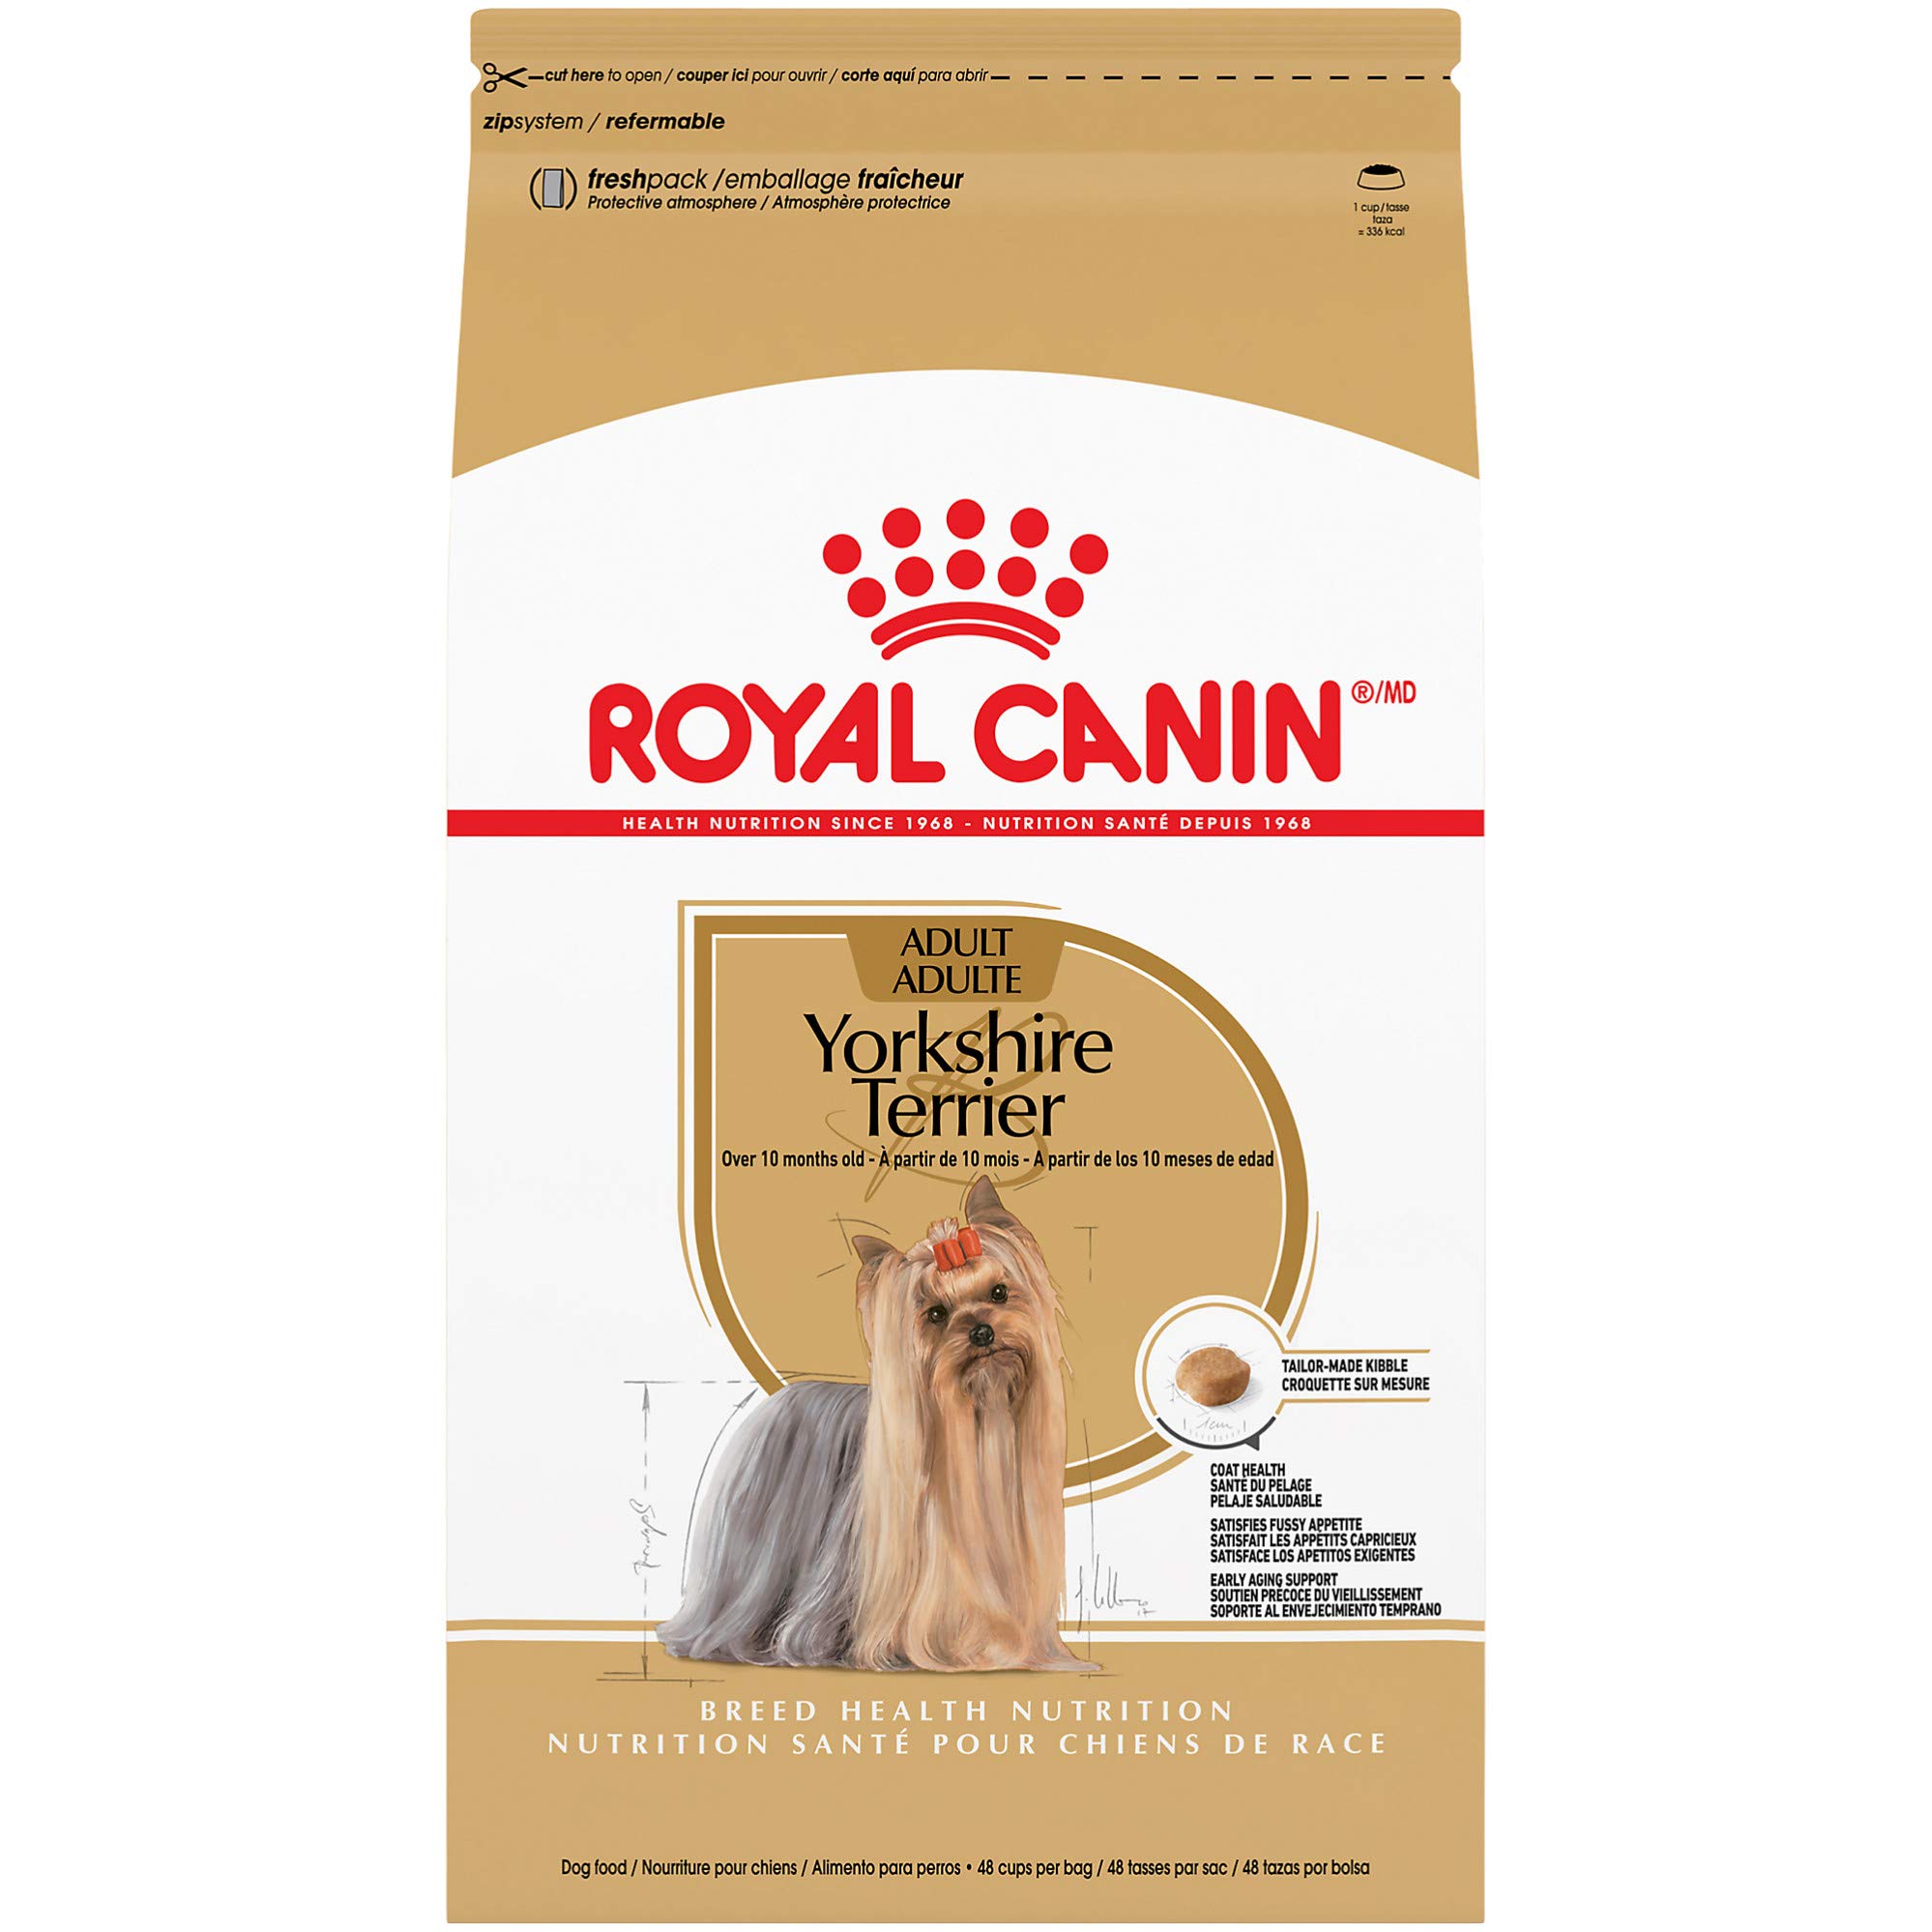 Royal Canin Breed Health Nutrition Yorkshire Terrier Ad...